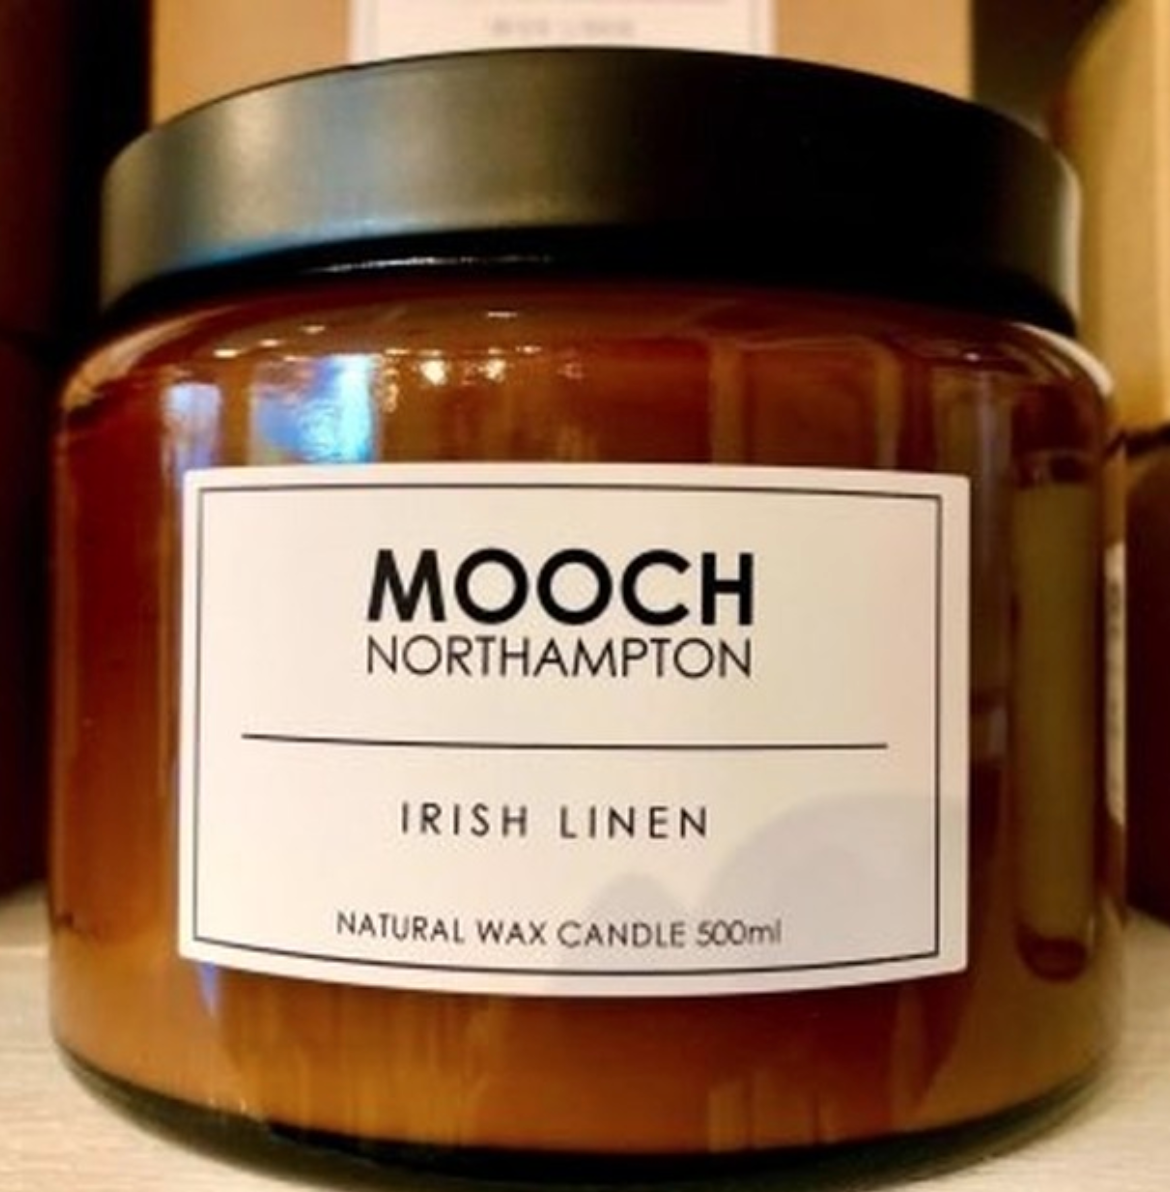 Above: Mooch’s own brand candles will continue to burn bright in 2021.